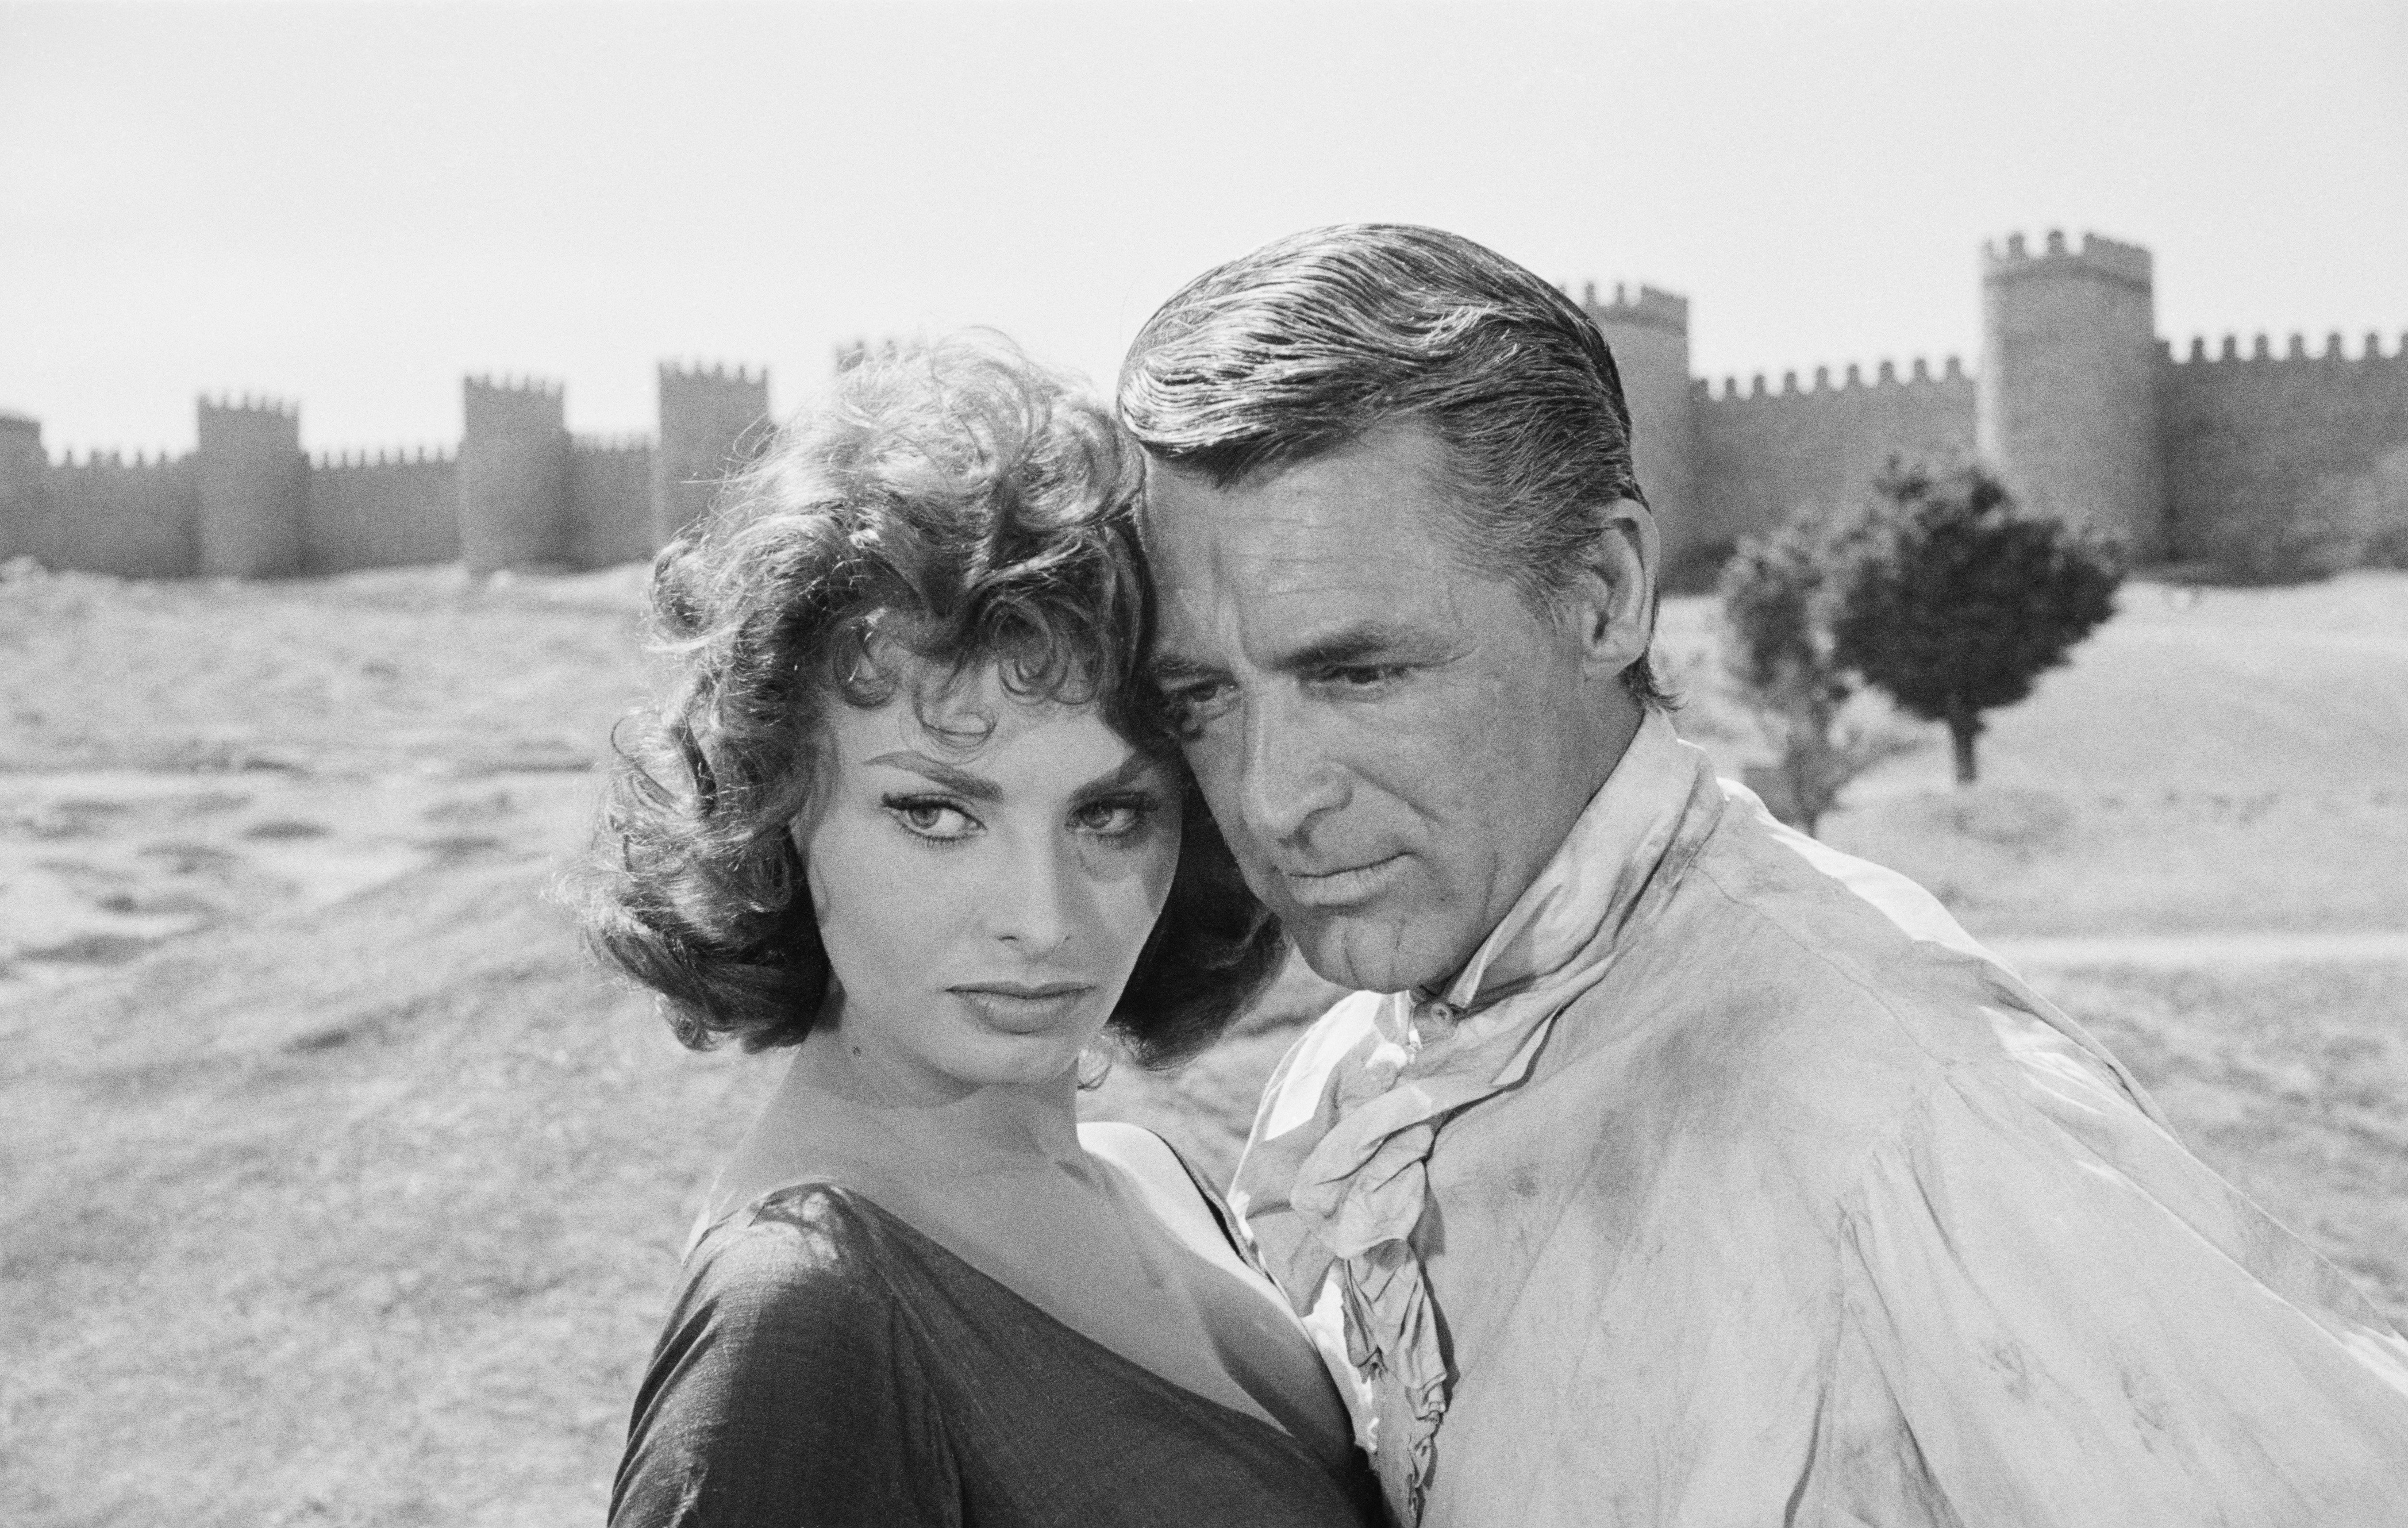 Cary Grant and Sophia Loren outside the walls of Avila, Spain, during location filming for "The Pride and the Passion." | Photo: Getty Images